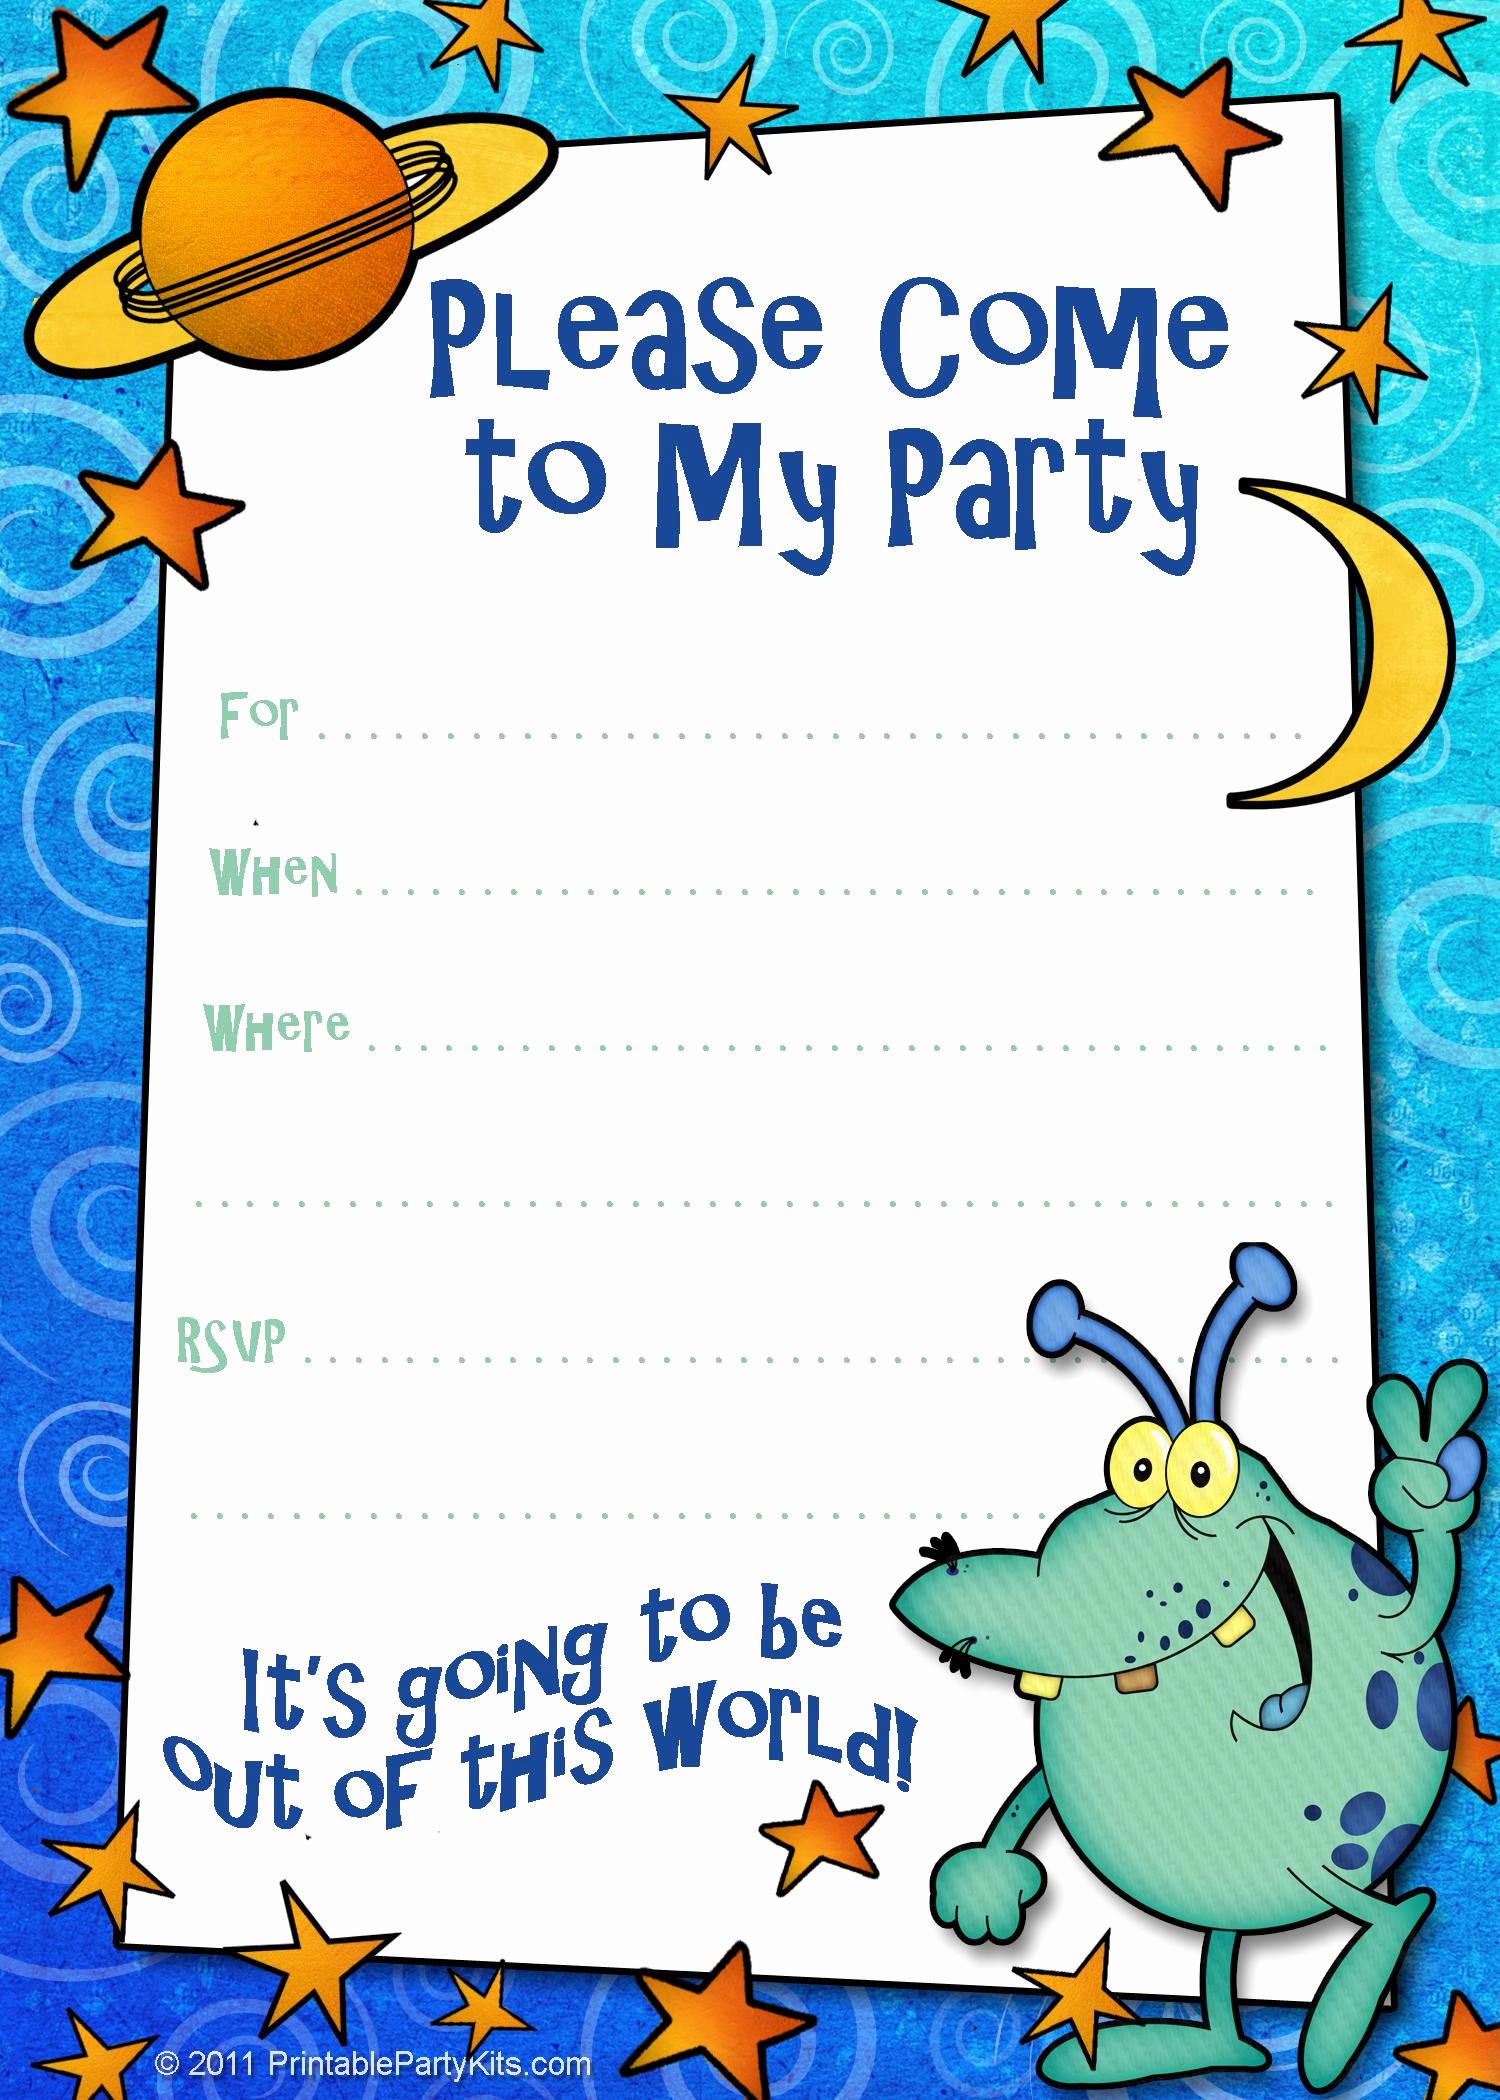 Free Printable Party Invitations Templates Lovely Free Printable Party Invitations Templates